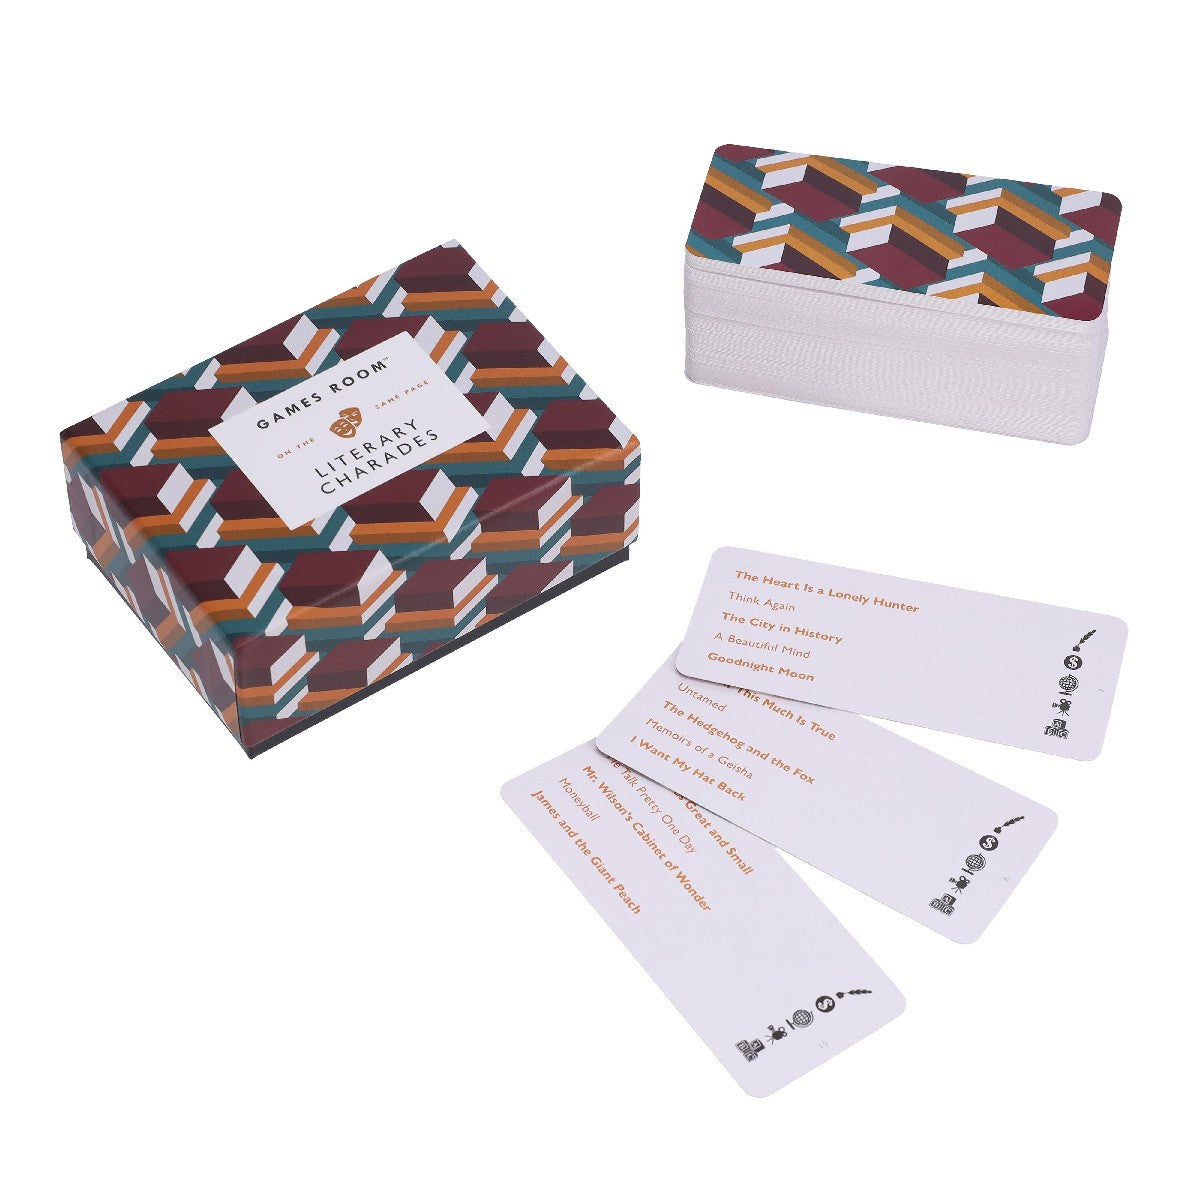 Card game | Literary charades - MCA Store Museum of Contemporary Art